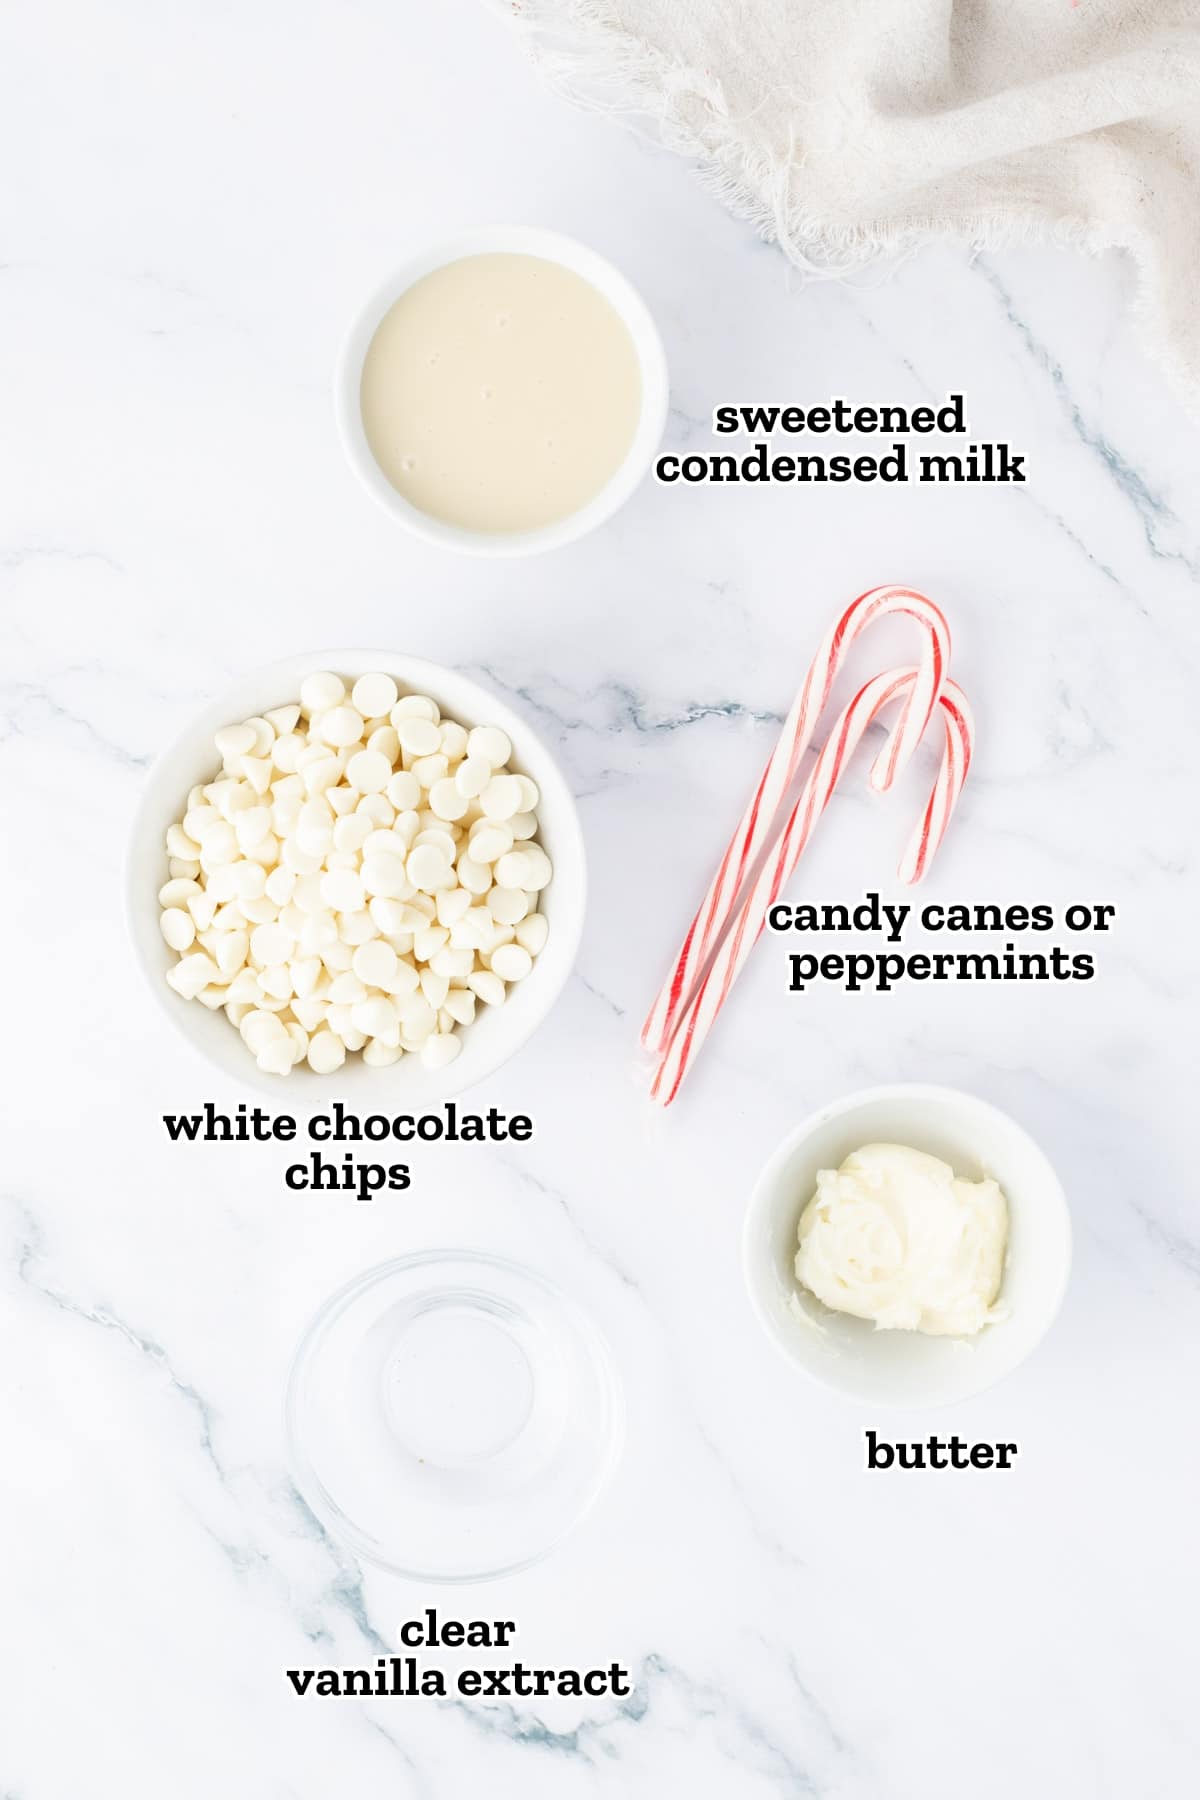 Labeled ingredients needed to make peppermint fudge with sweetened condensed milk.